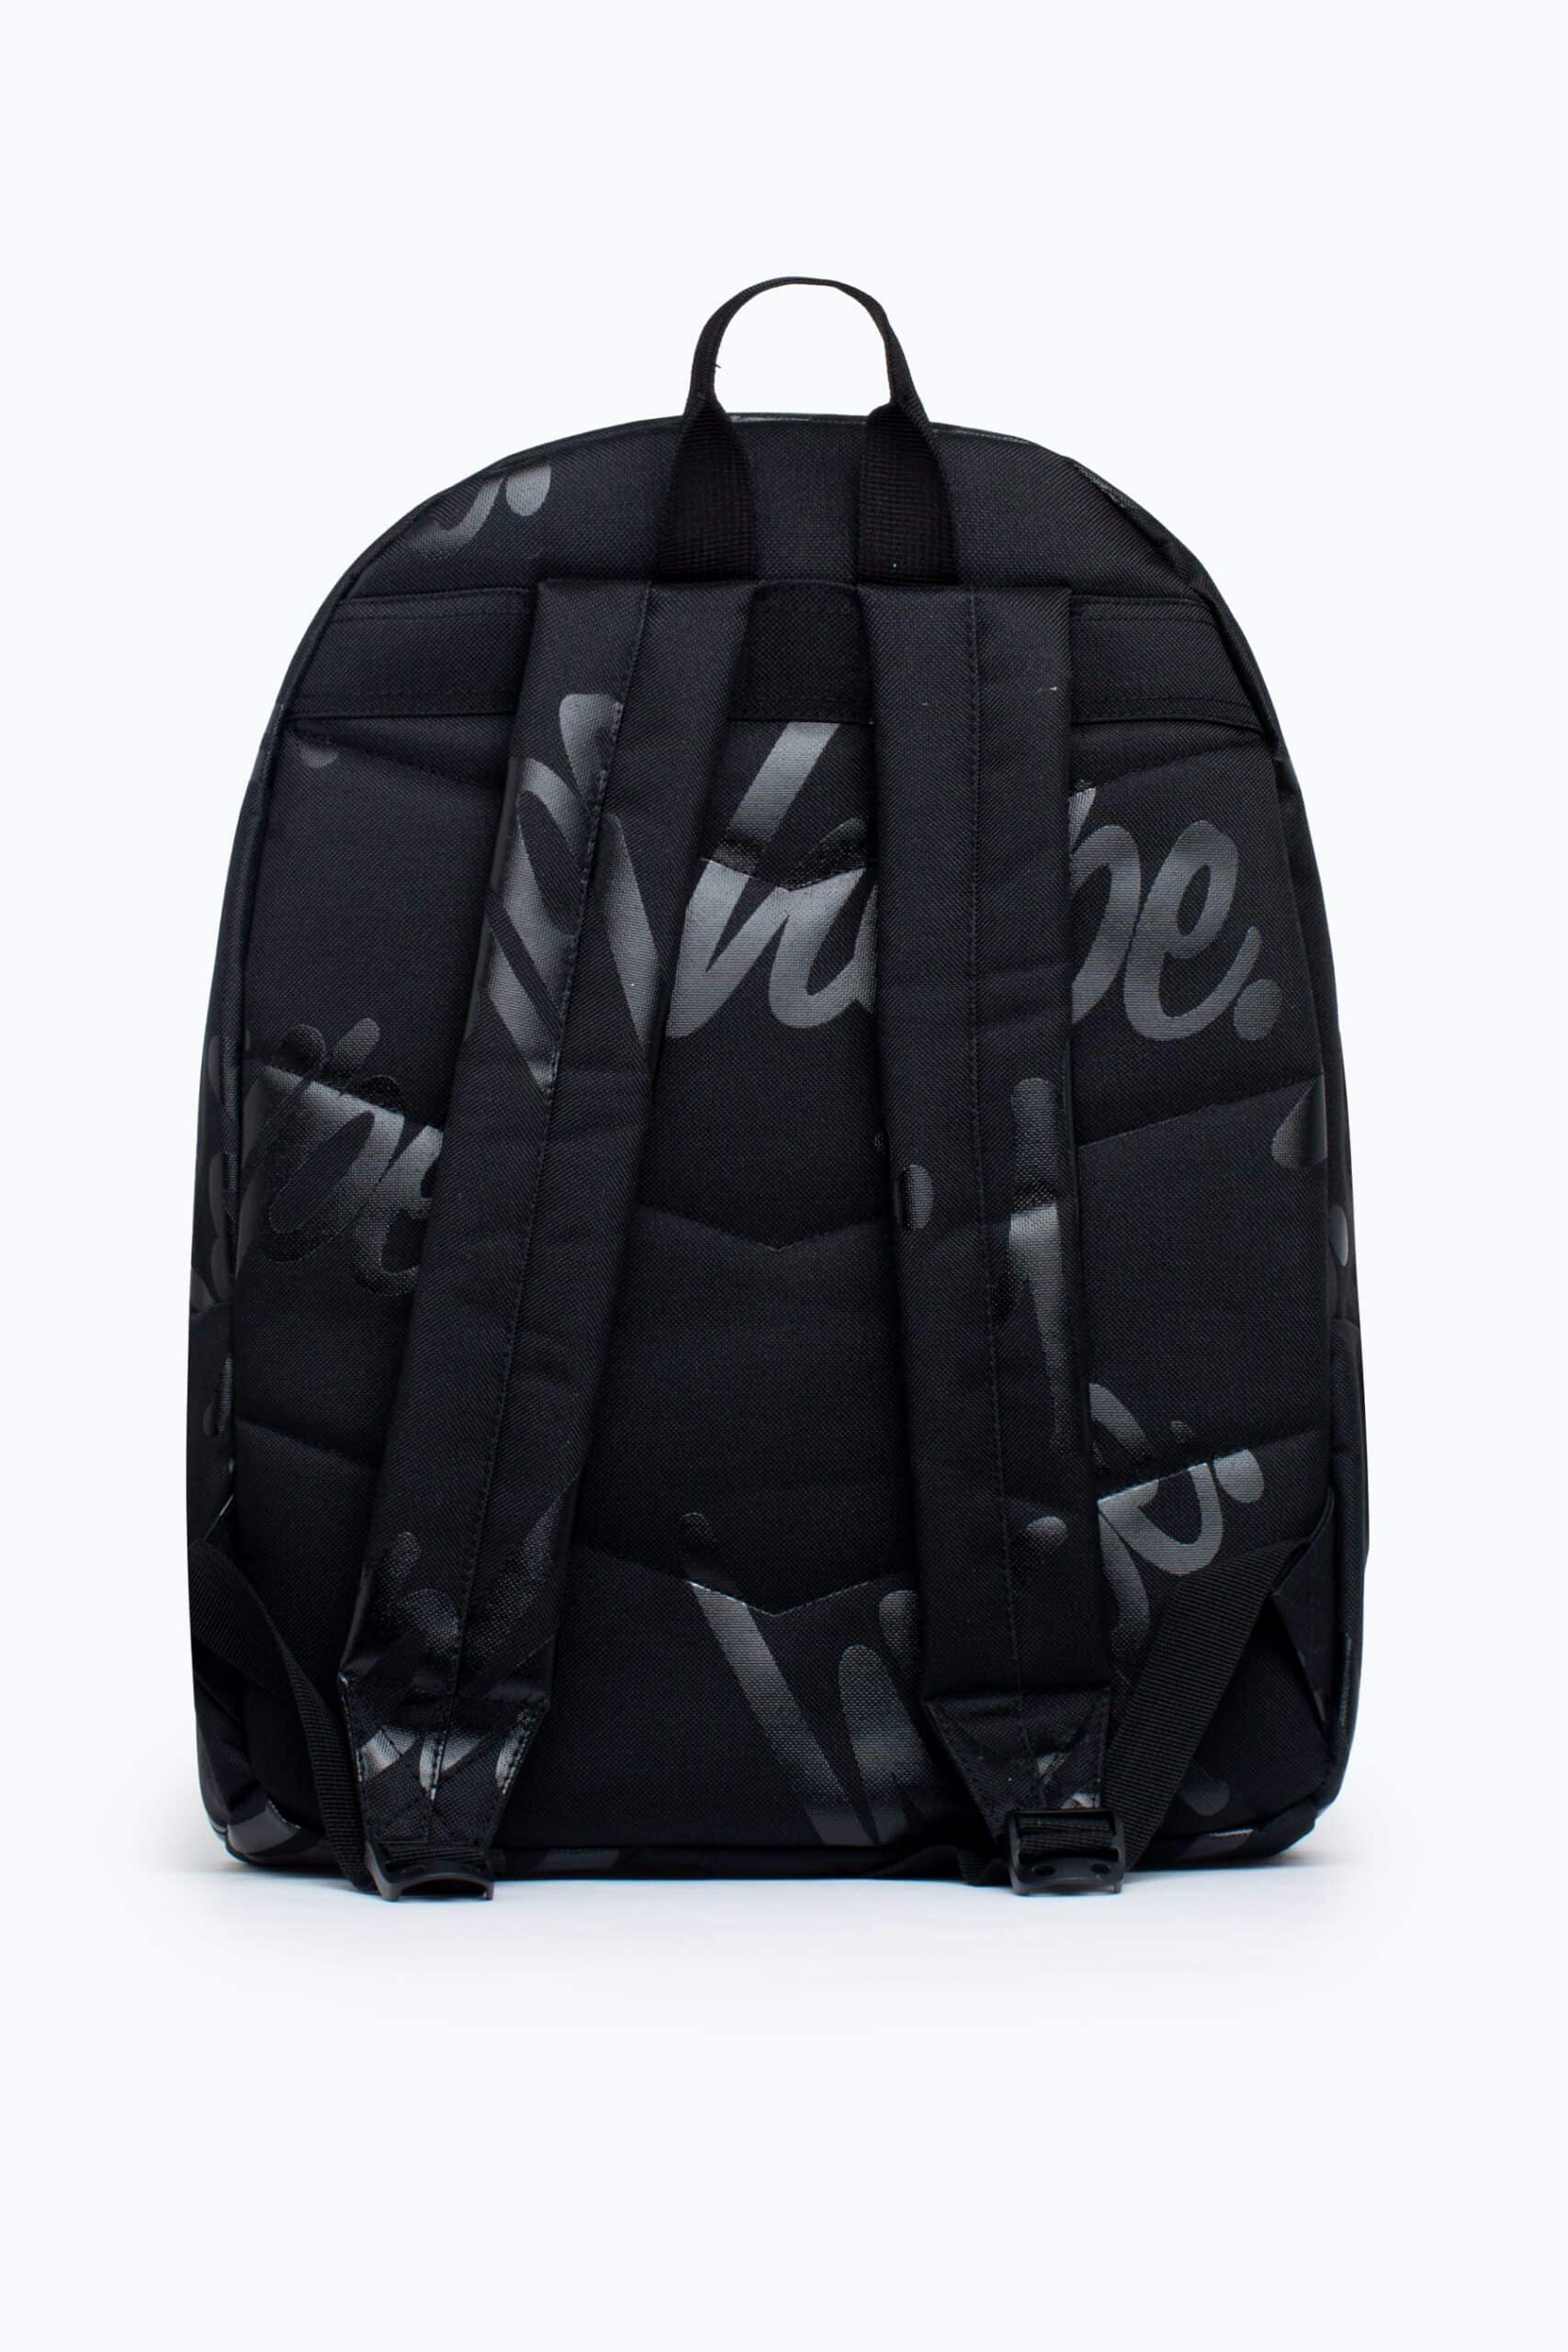 hype black backpack with multiple logos back view